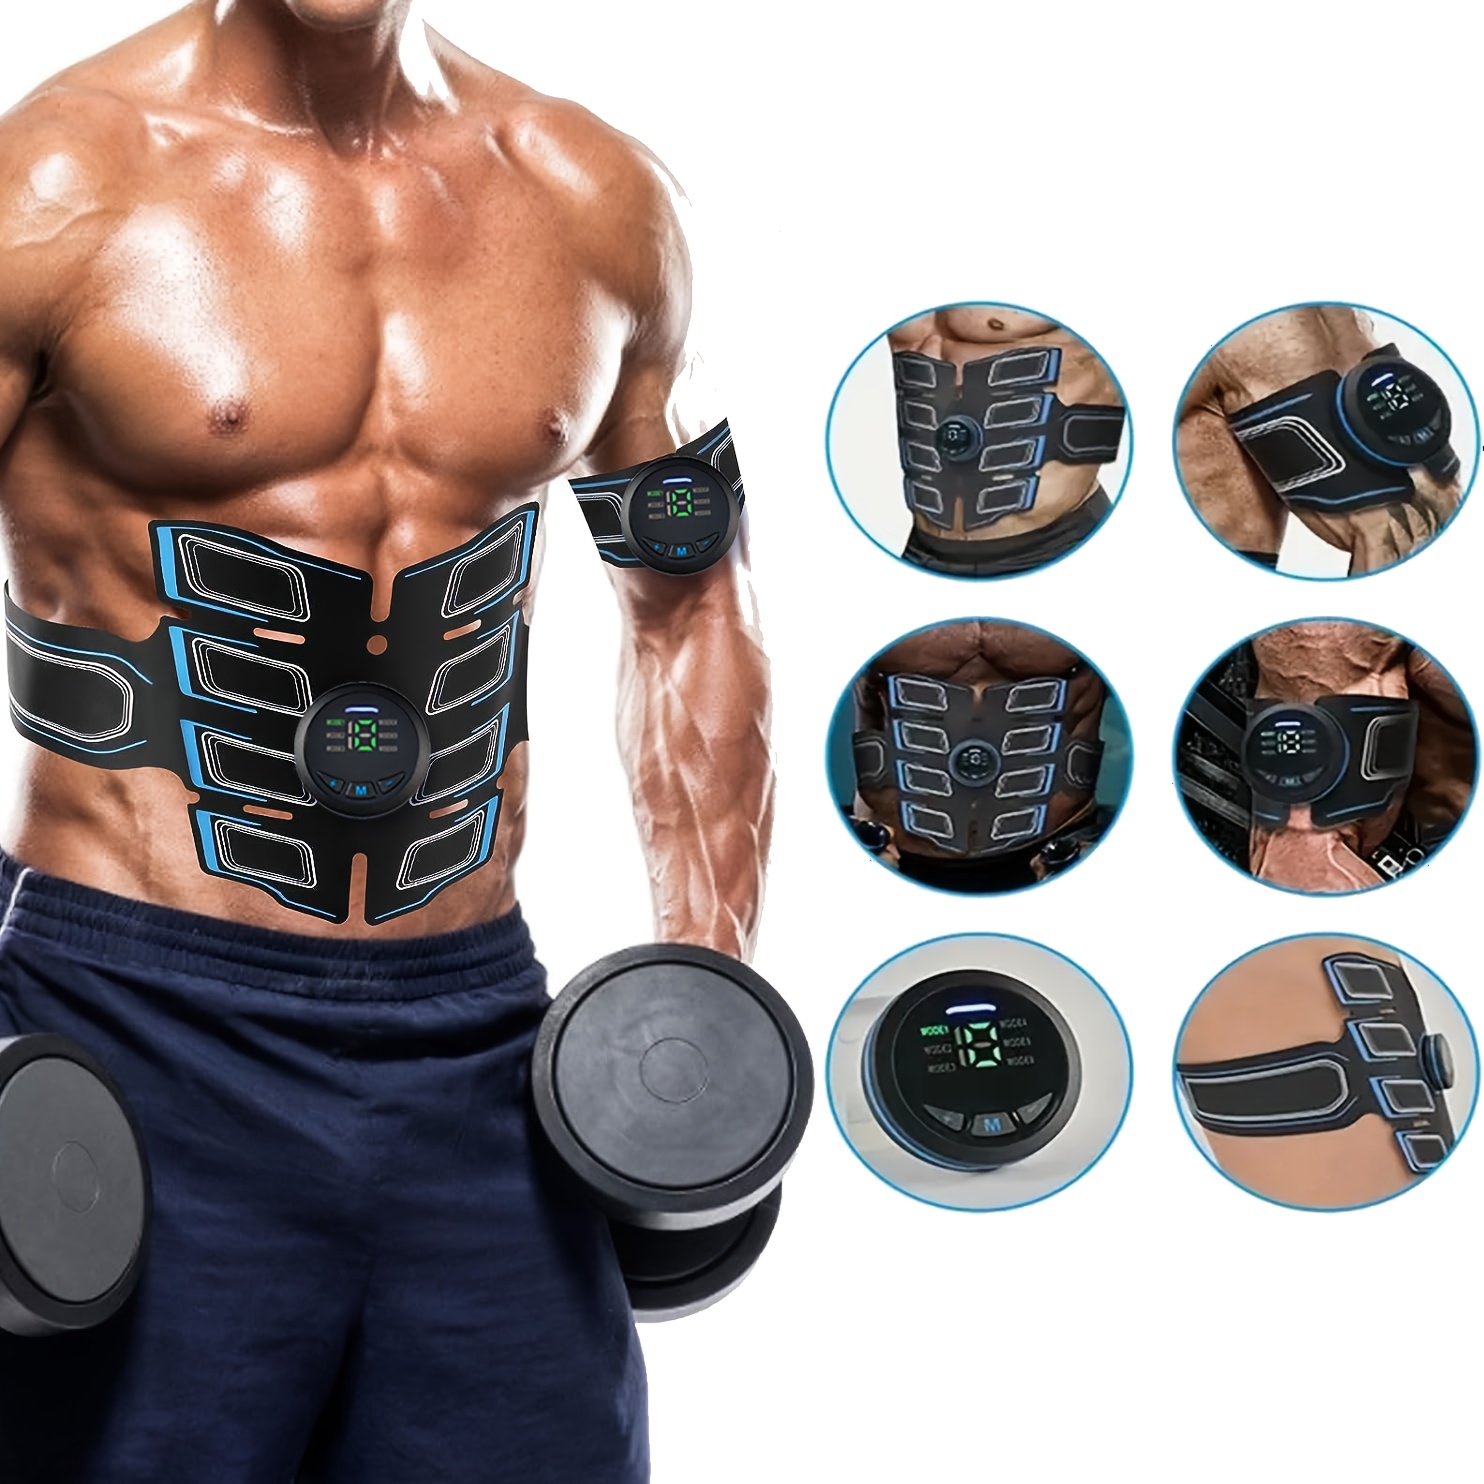 Electronic Muscle Stimulator ABS Stimulator, Rechargeable AB Stimulator  Muscle Toner, Fitness Waist Belt Home Office Workout Equipment for Men  Women